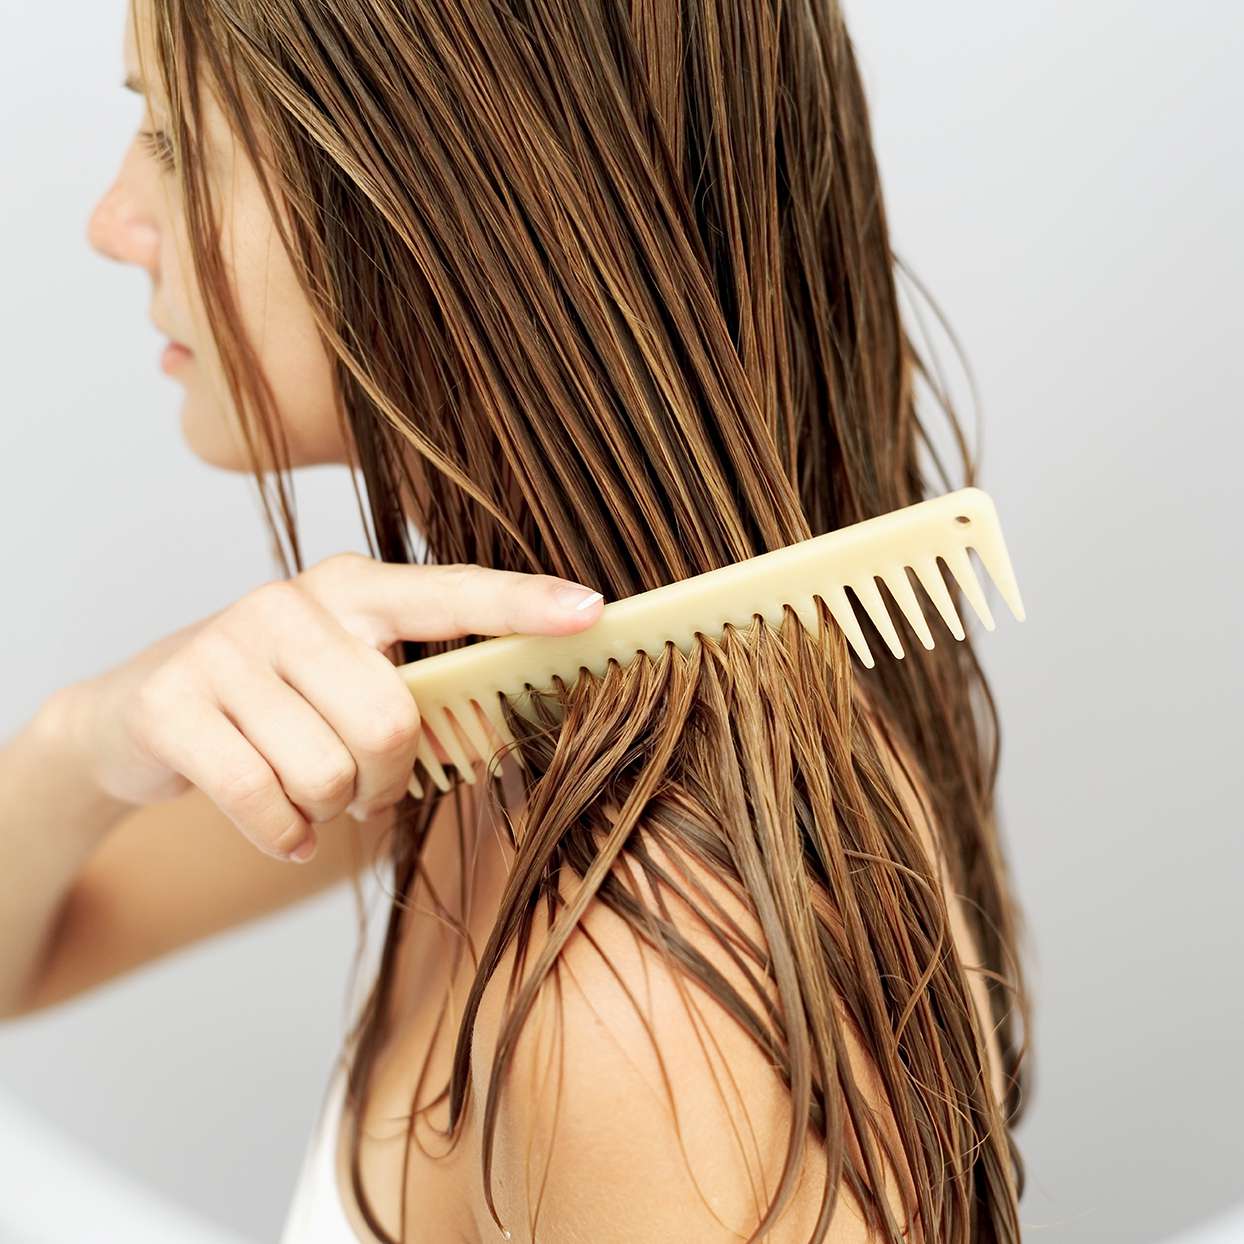 how to remove keratin treatment from hair at home